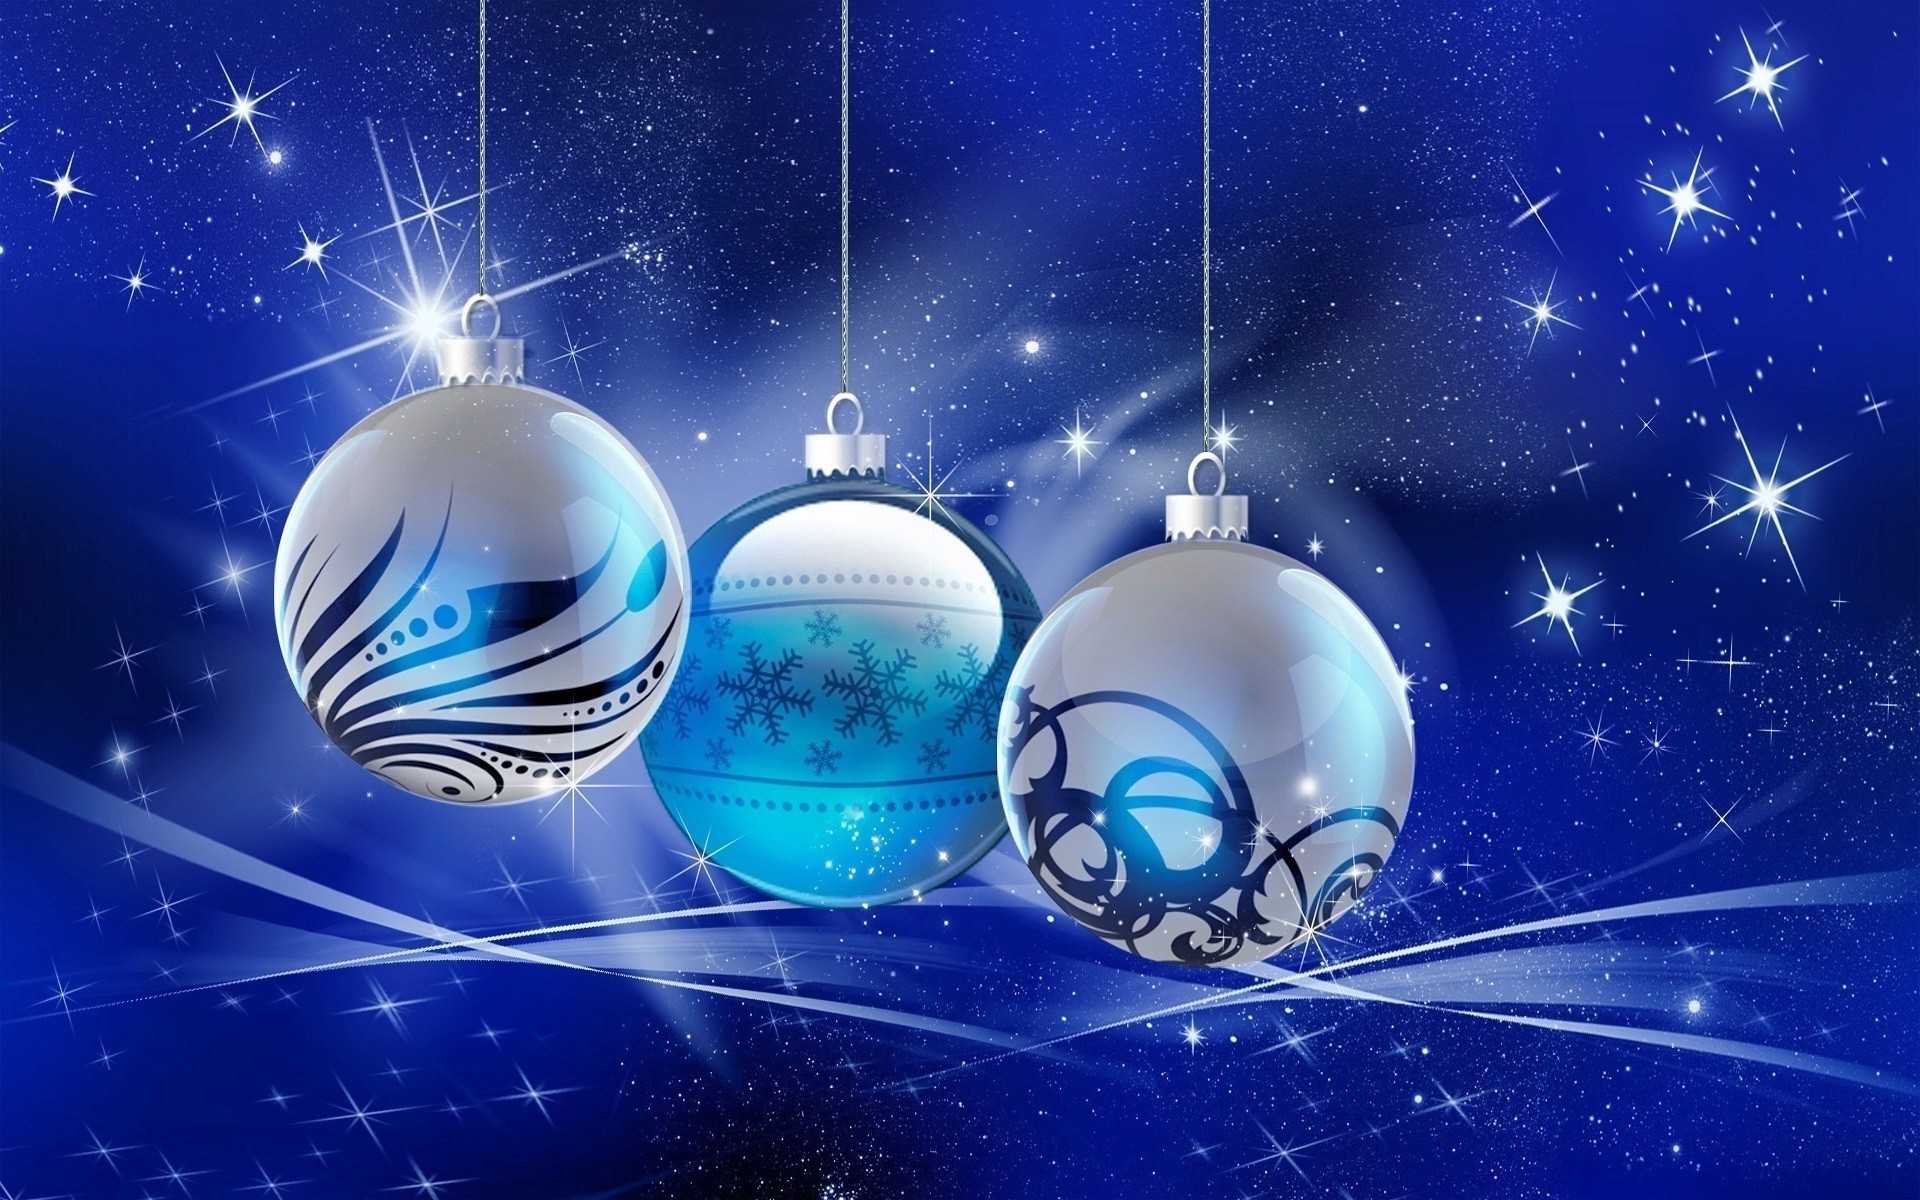 new year sphere ball-shaped christmas space ball desktop planet merry design abstract illustration moon luminescence science celebration light shining astronomy winter